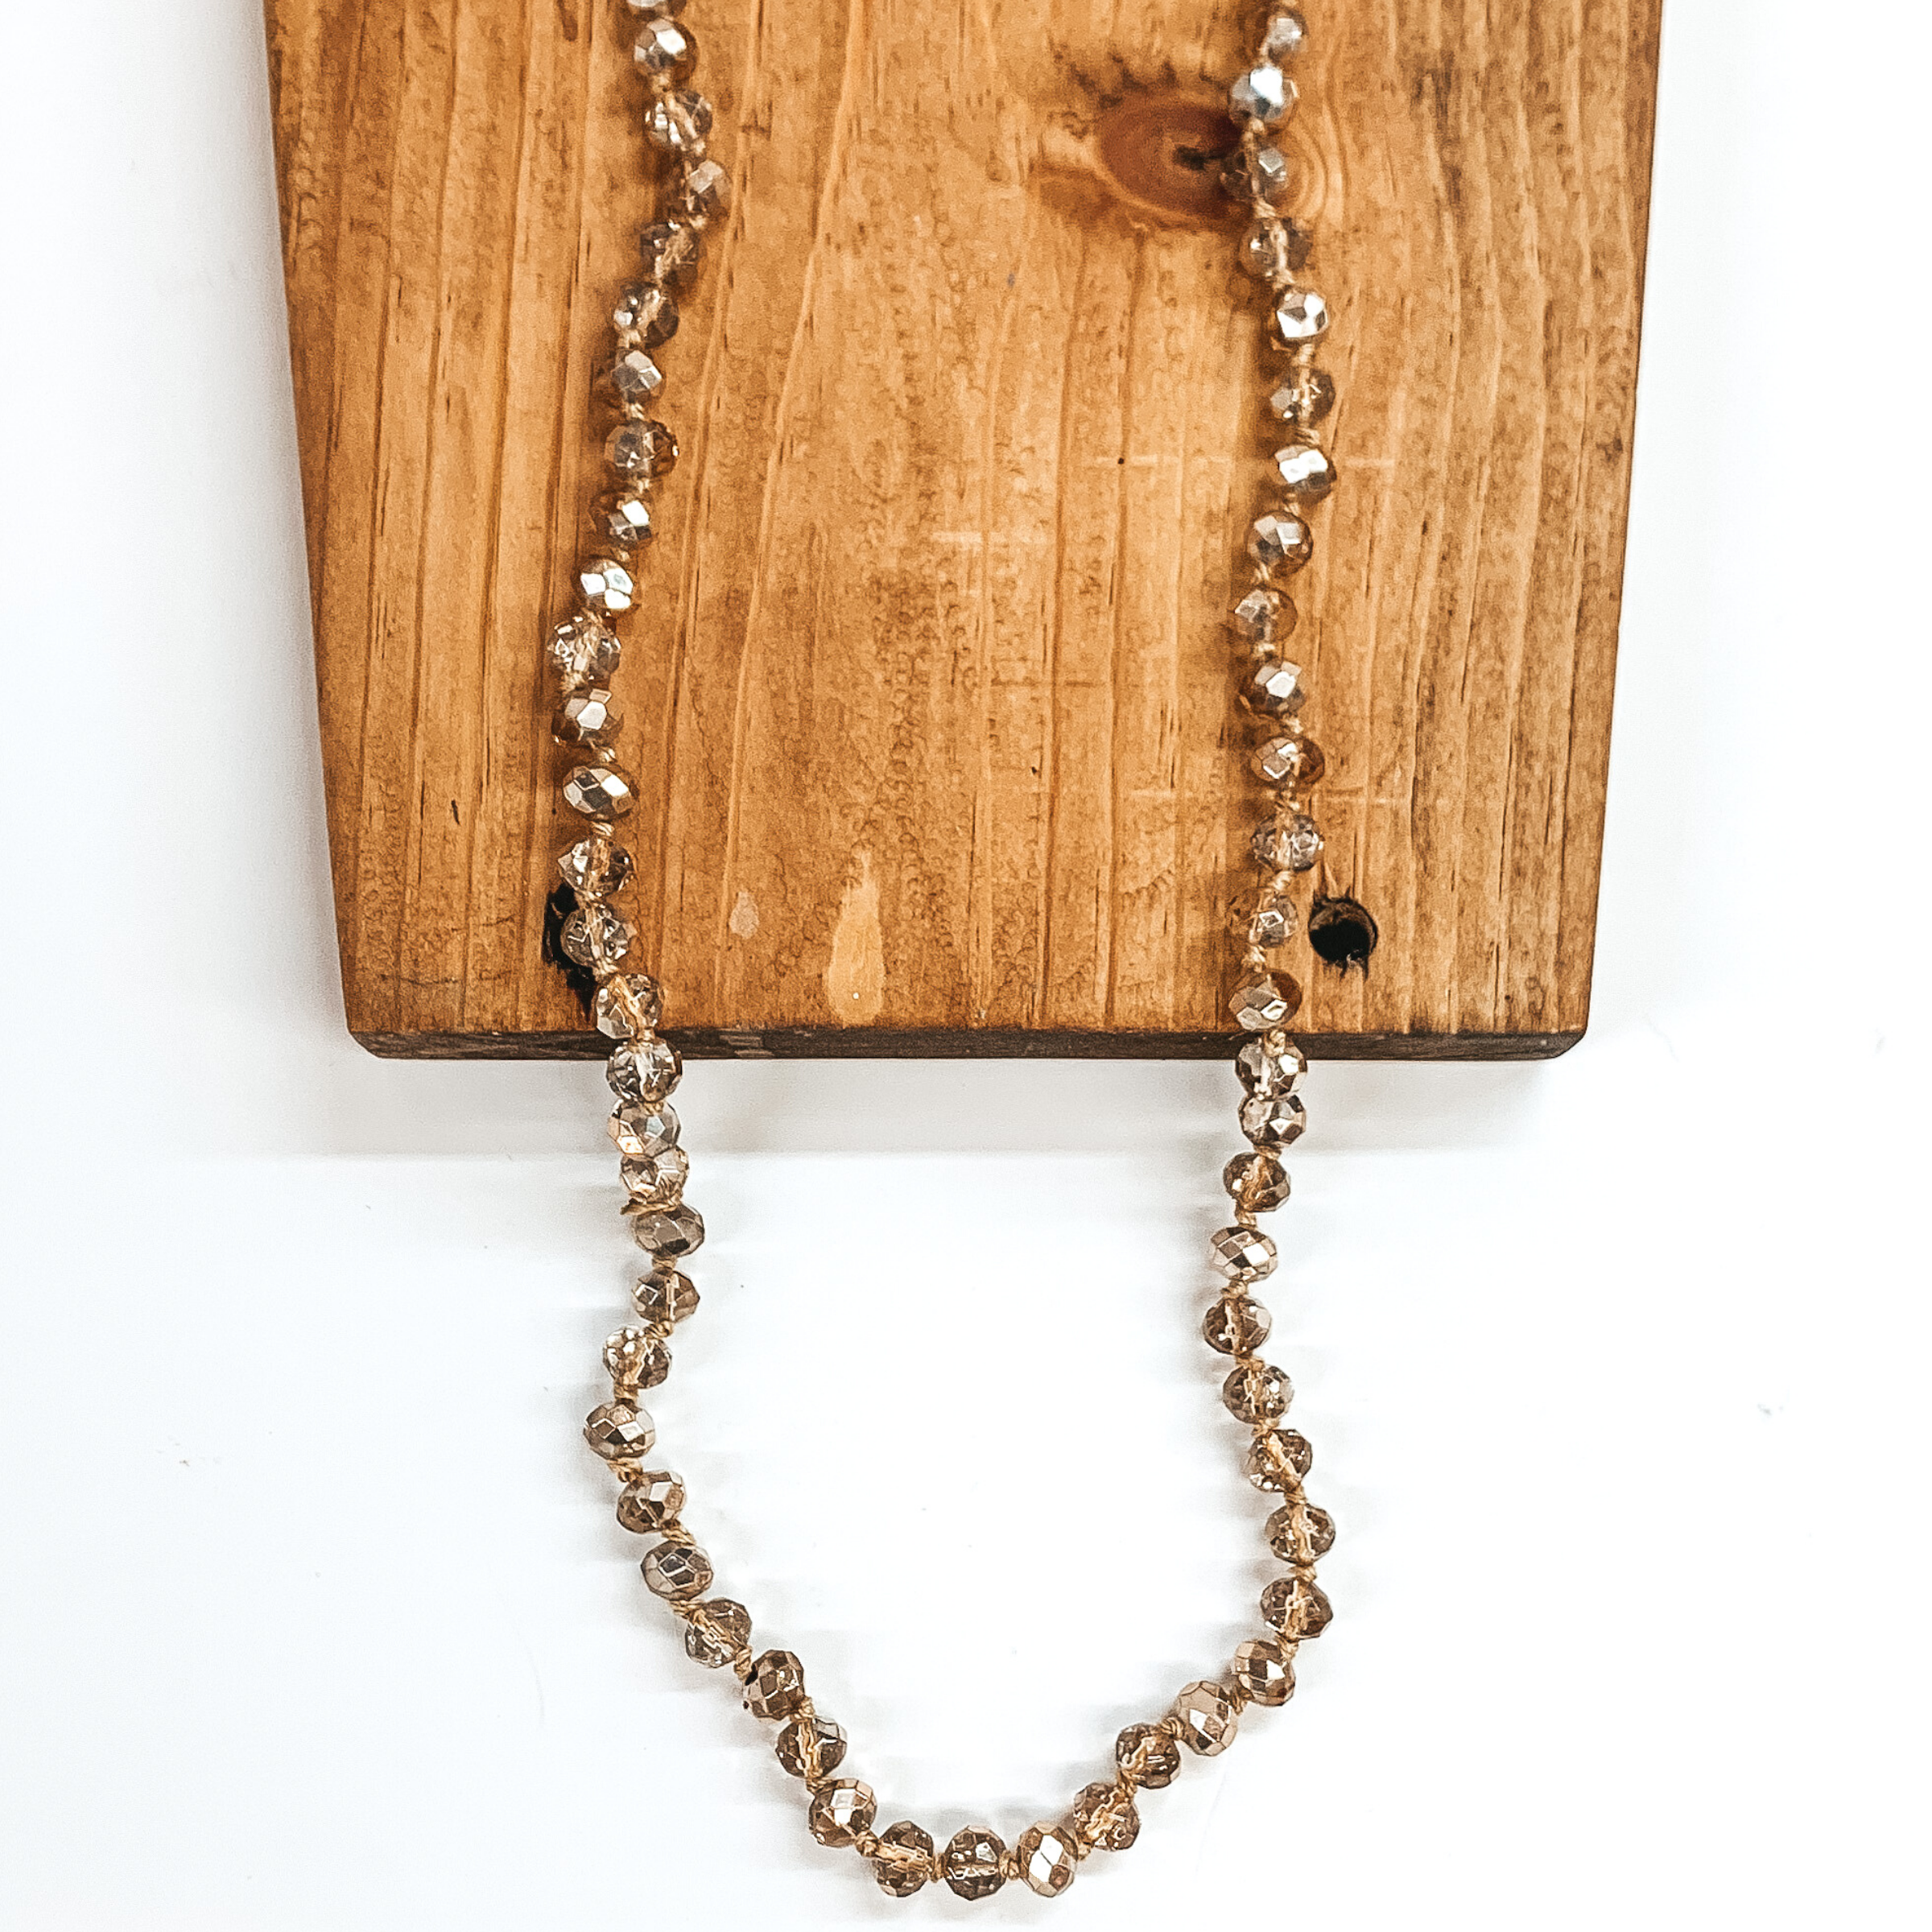 Gold and clear mix crystal beaded necklace. This necklace is pictured on a brown block on a white background.